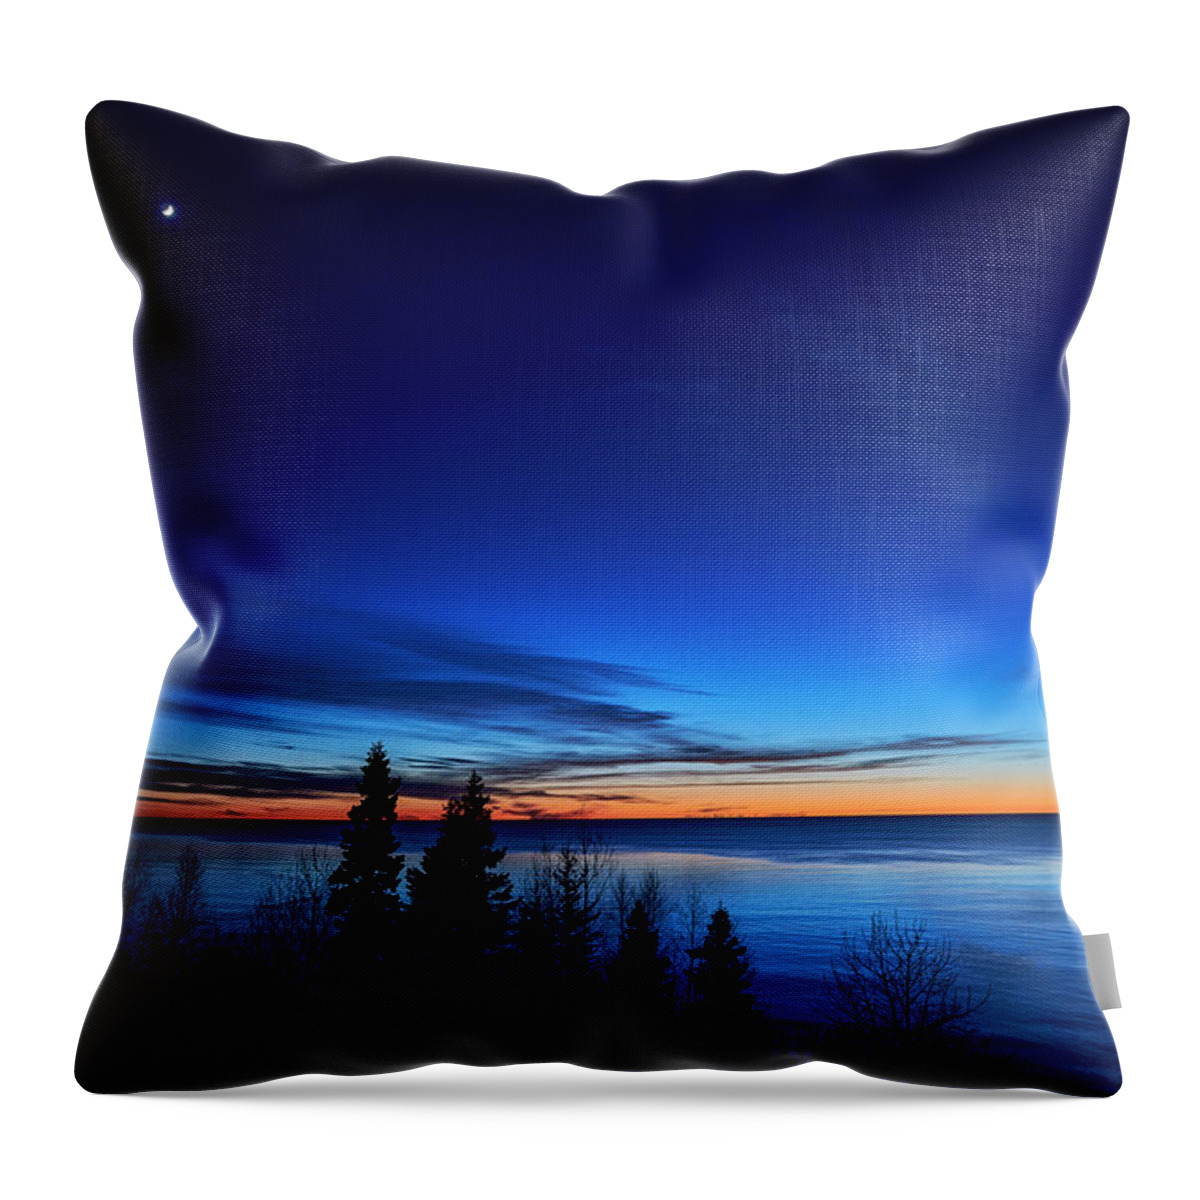 Environment Water Shore Frozen Blue Colorful Wilderness Sunset Light Shoreline Rocky Scenic Ice Cold Terrain Icy Vibrant Natural Close Up Canada Throw Pillow featuring the photograph Velvet Horizons by Doug Gibbons